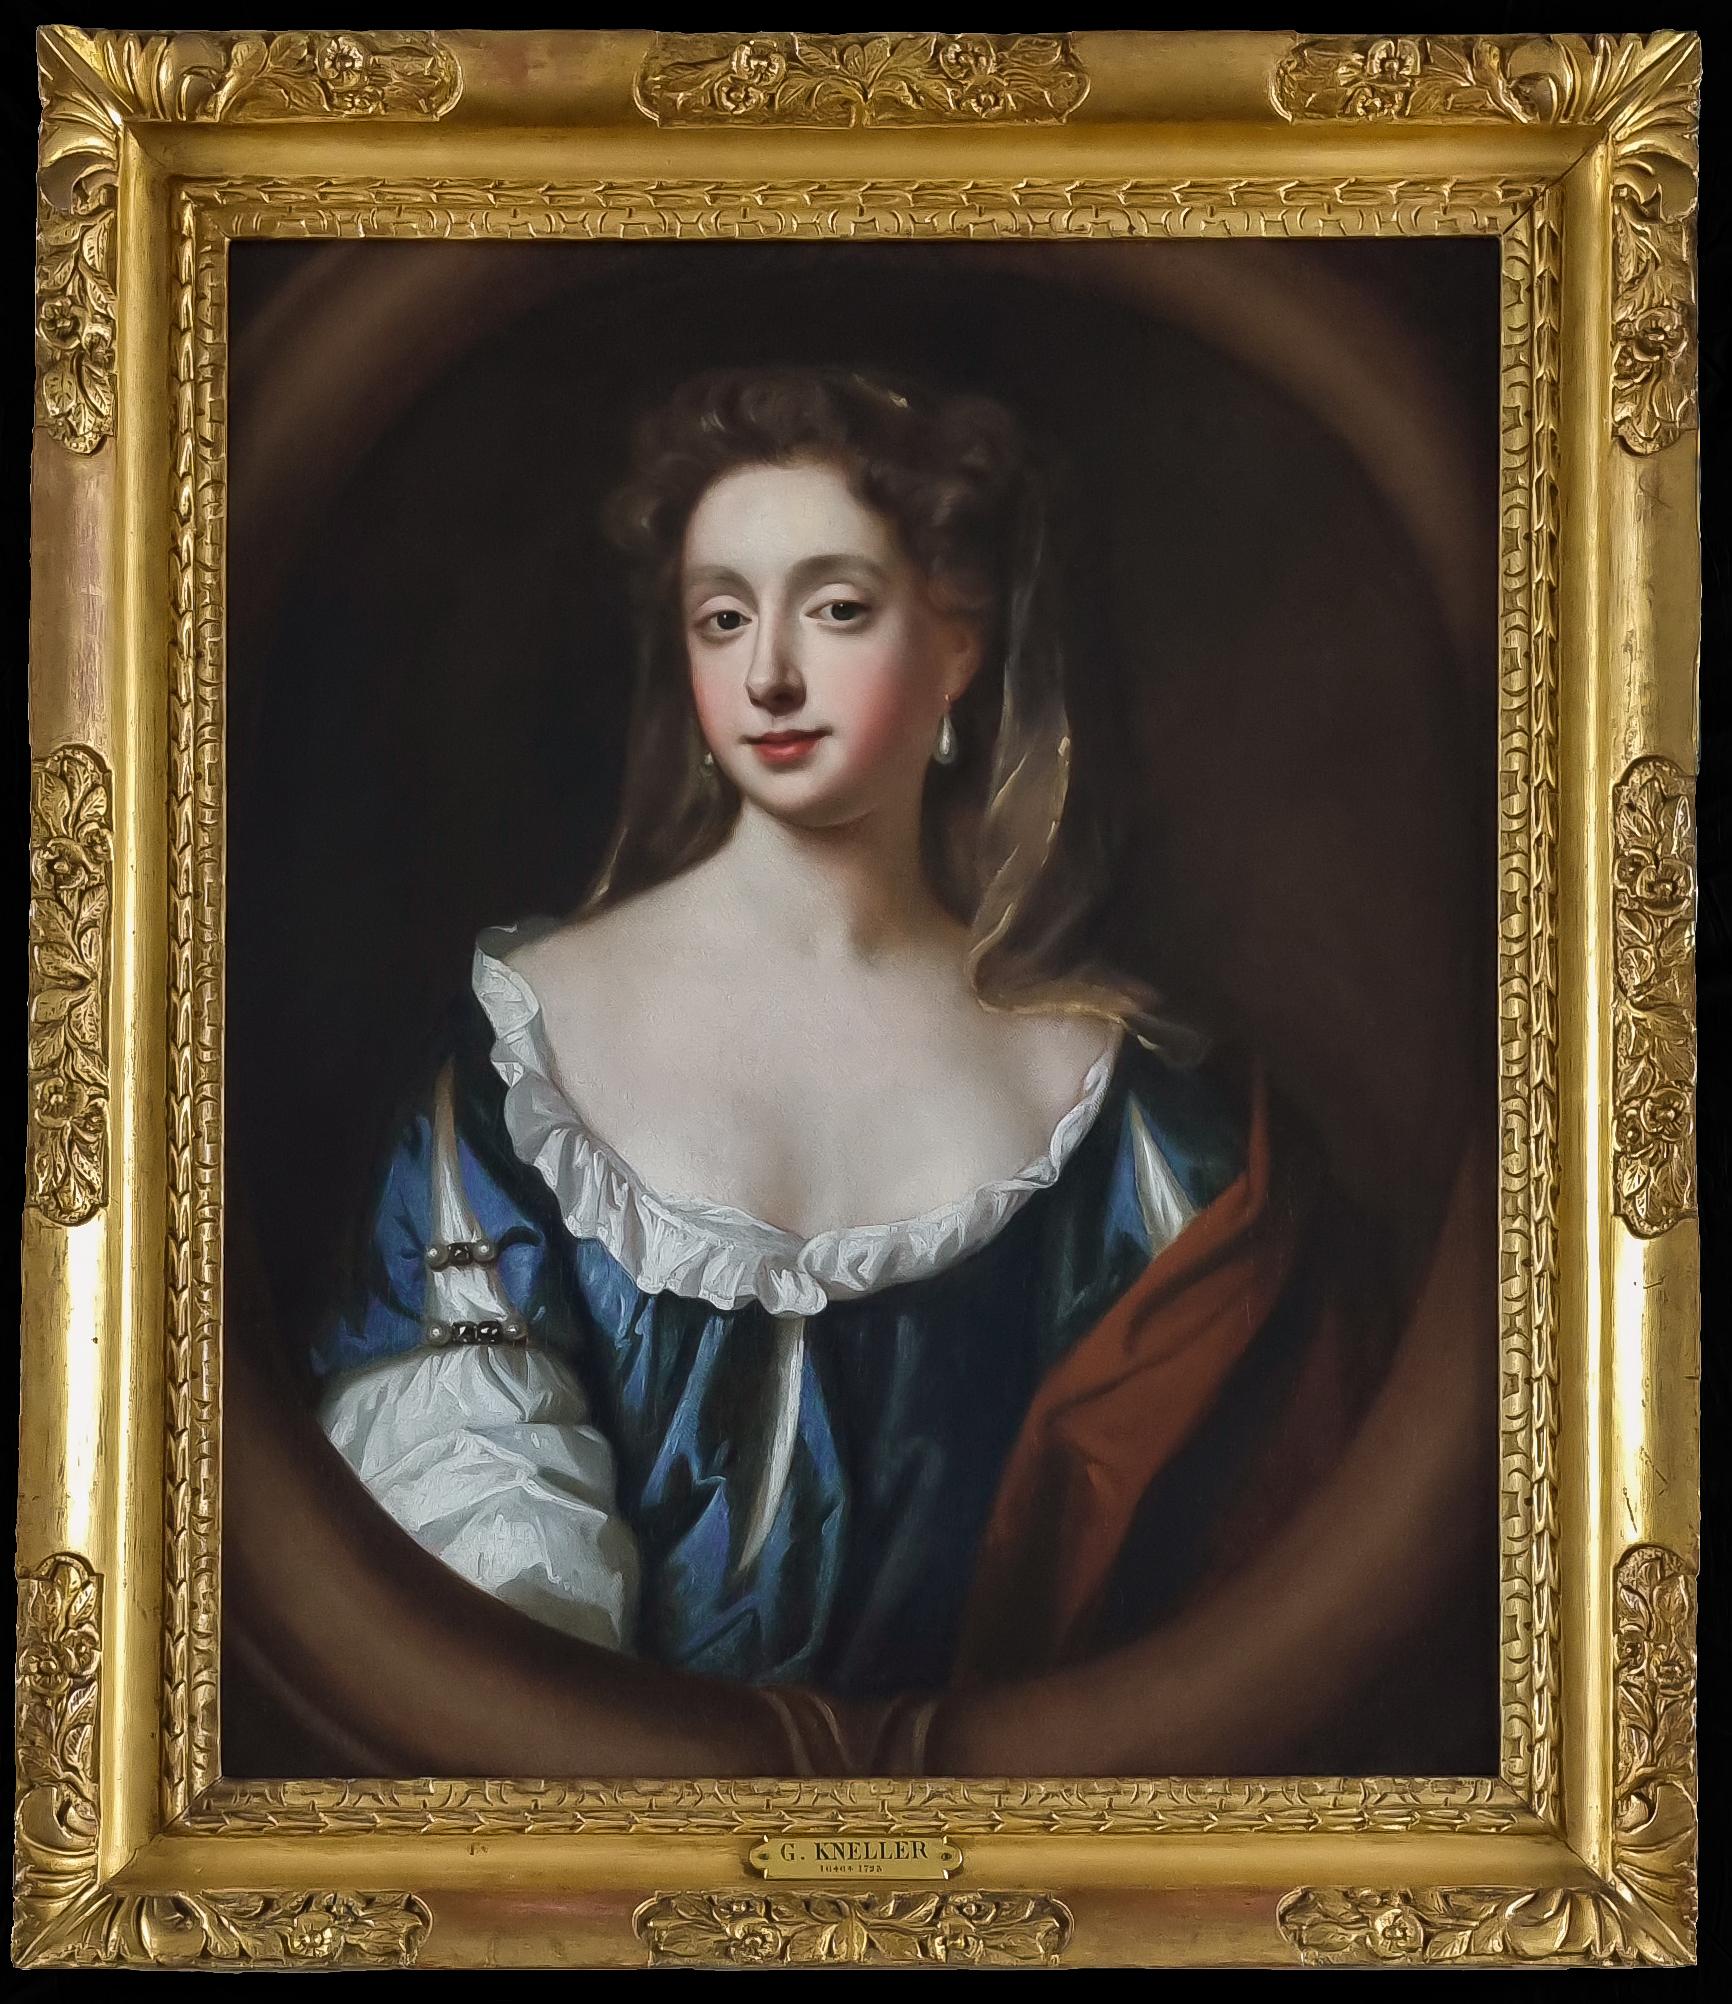 This elegant and graceful portrait, presented by Titan Fine Art, was painted by William Wissing, whom by 1683 became royal painter in all but name to King Charles II and his wife Queen Catherine of Braganza, and had only but one real rival in